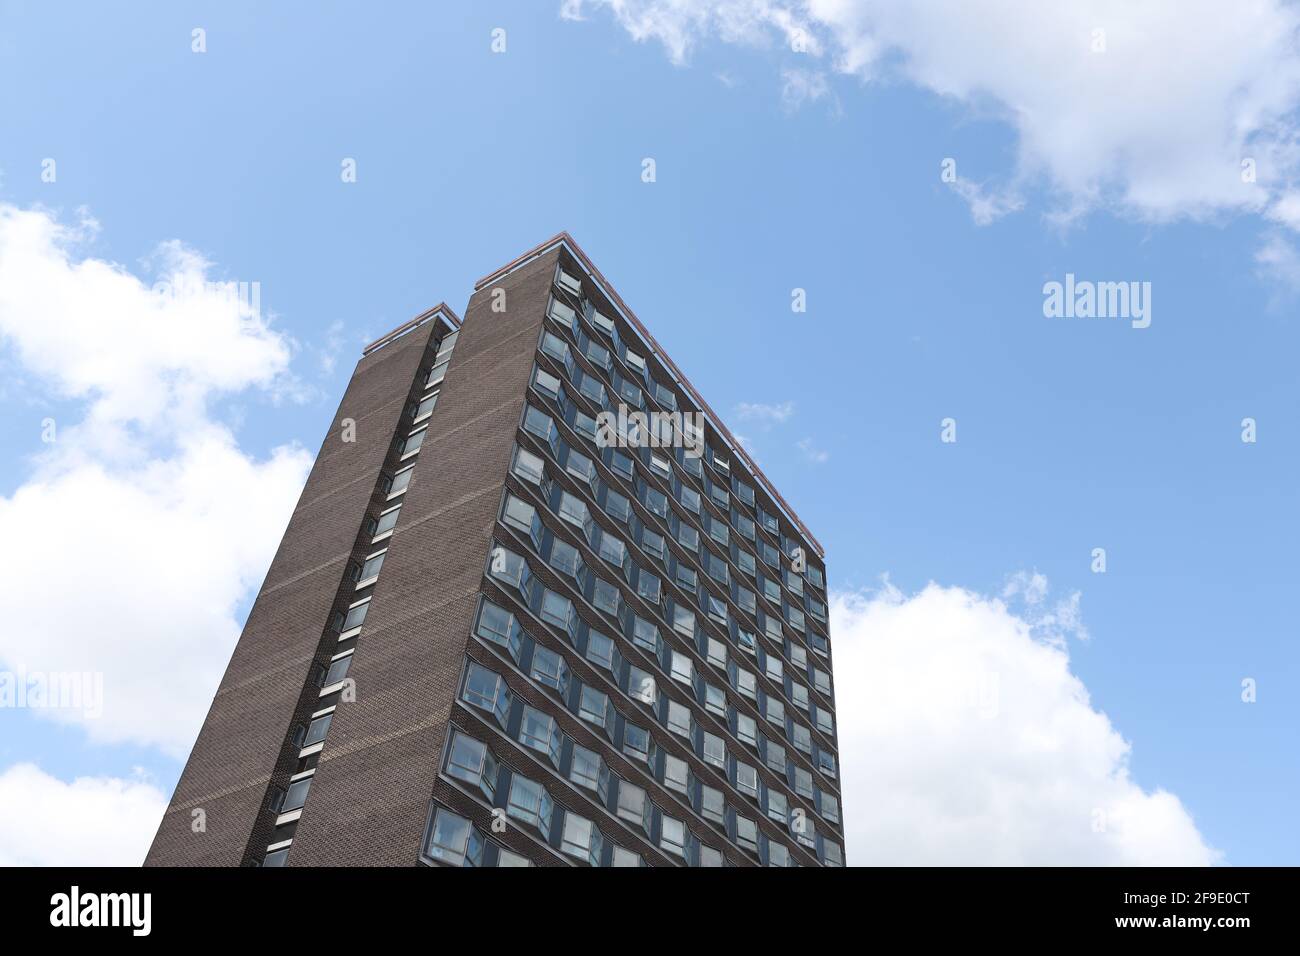 Brooke House, Basildon, Essex - an iconic, listed 14-storey block of flats built in 1960-62. Stock Photo